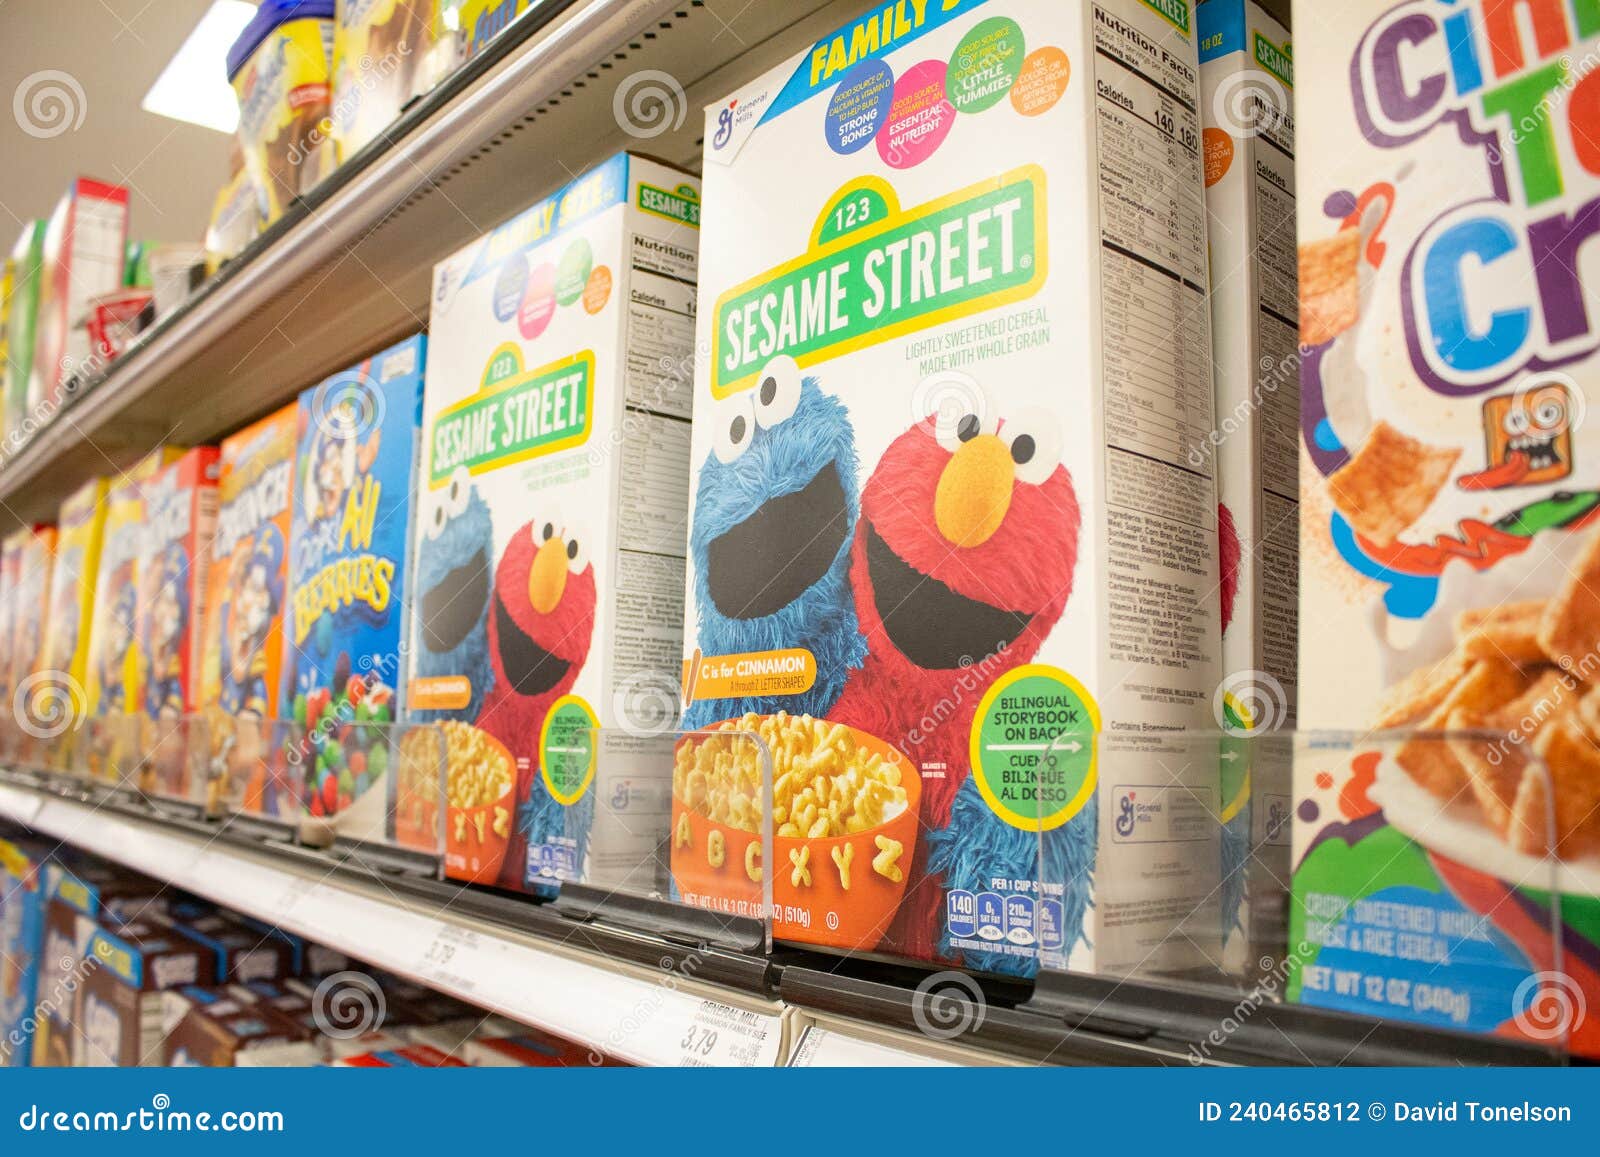 https://thumbs.dreamstime.com/z/general-mills-sesame-street-cereal-store-los-angeles-california-united-states-view-several-boxes-general-mills-sesame-240465812.jpg